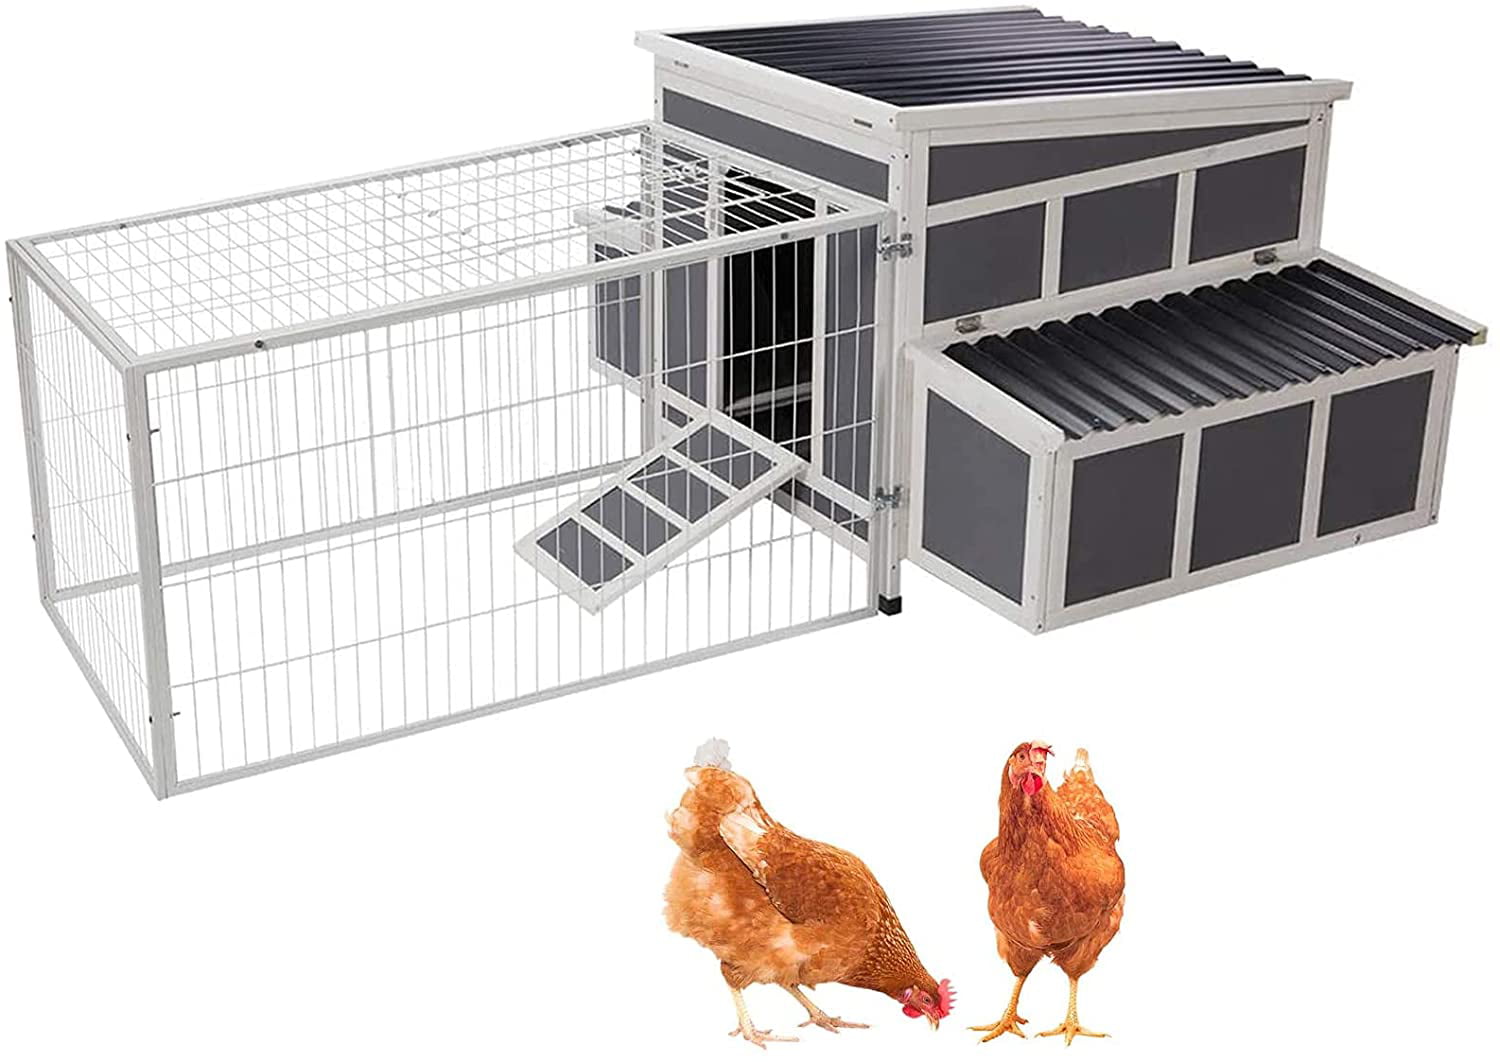 New Large Wood Chicken Coop Backyard Hen House 5-8 Chickens w 6 nesting box 